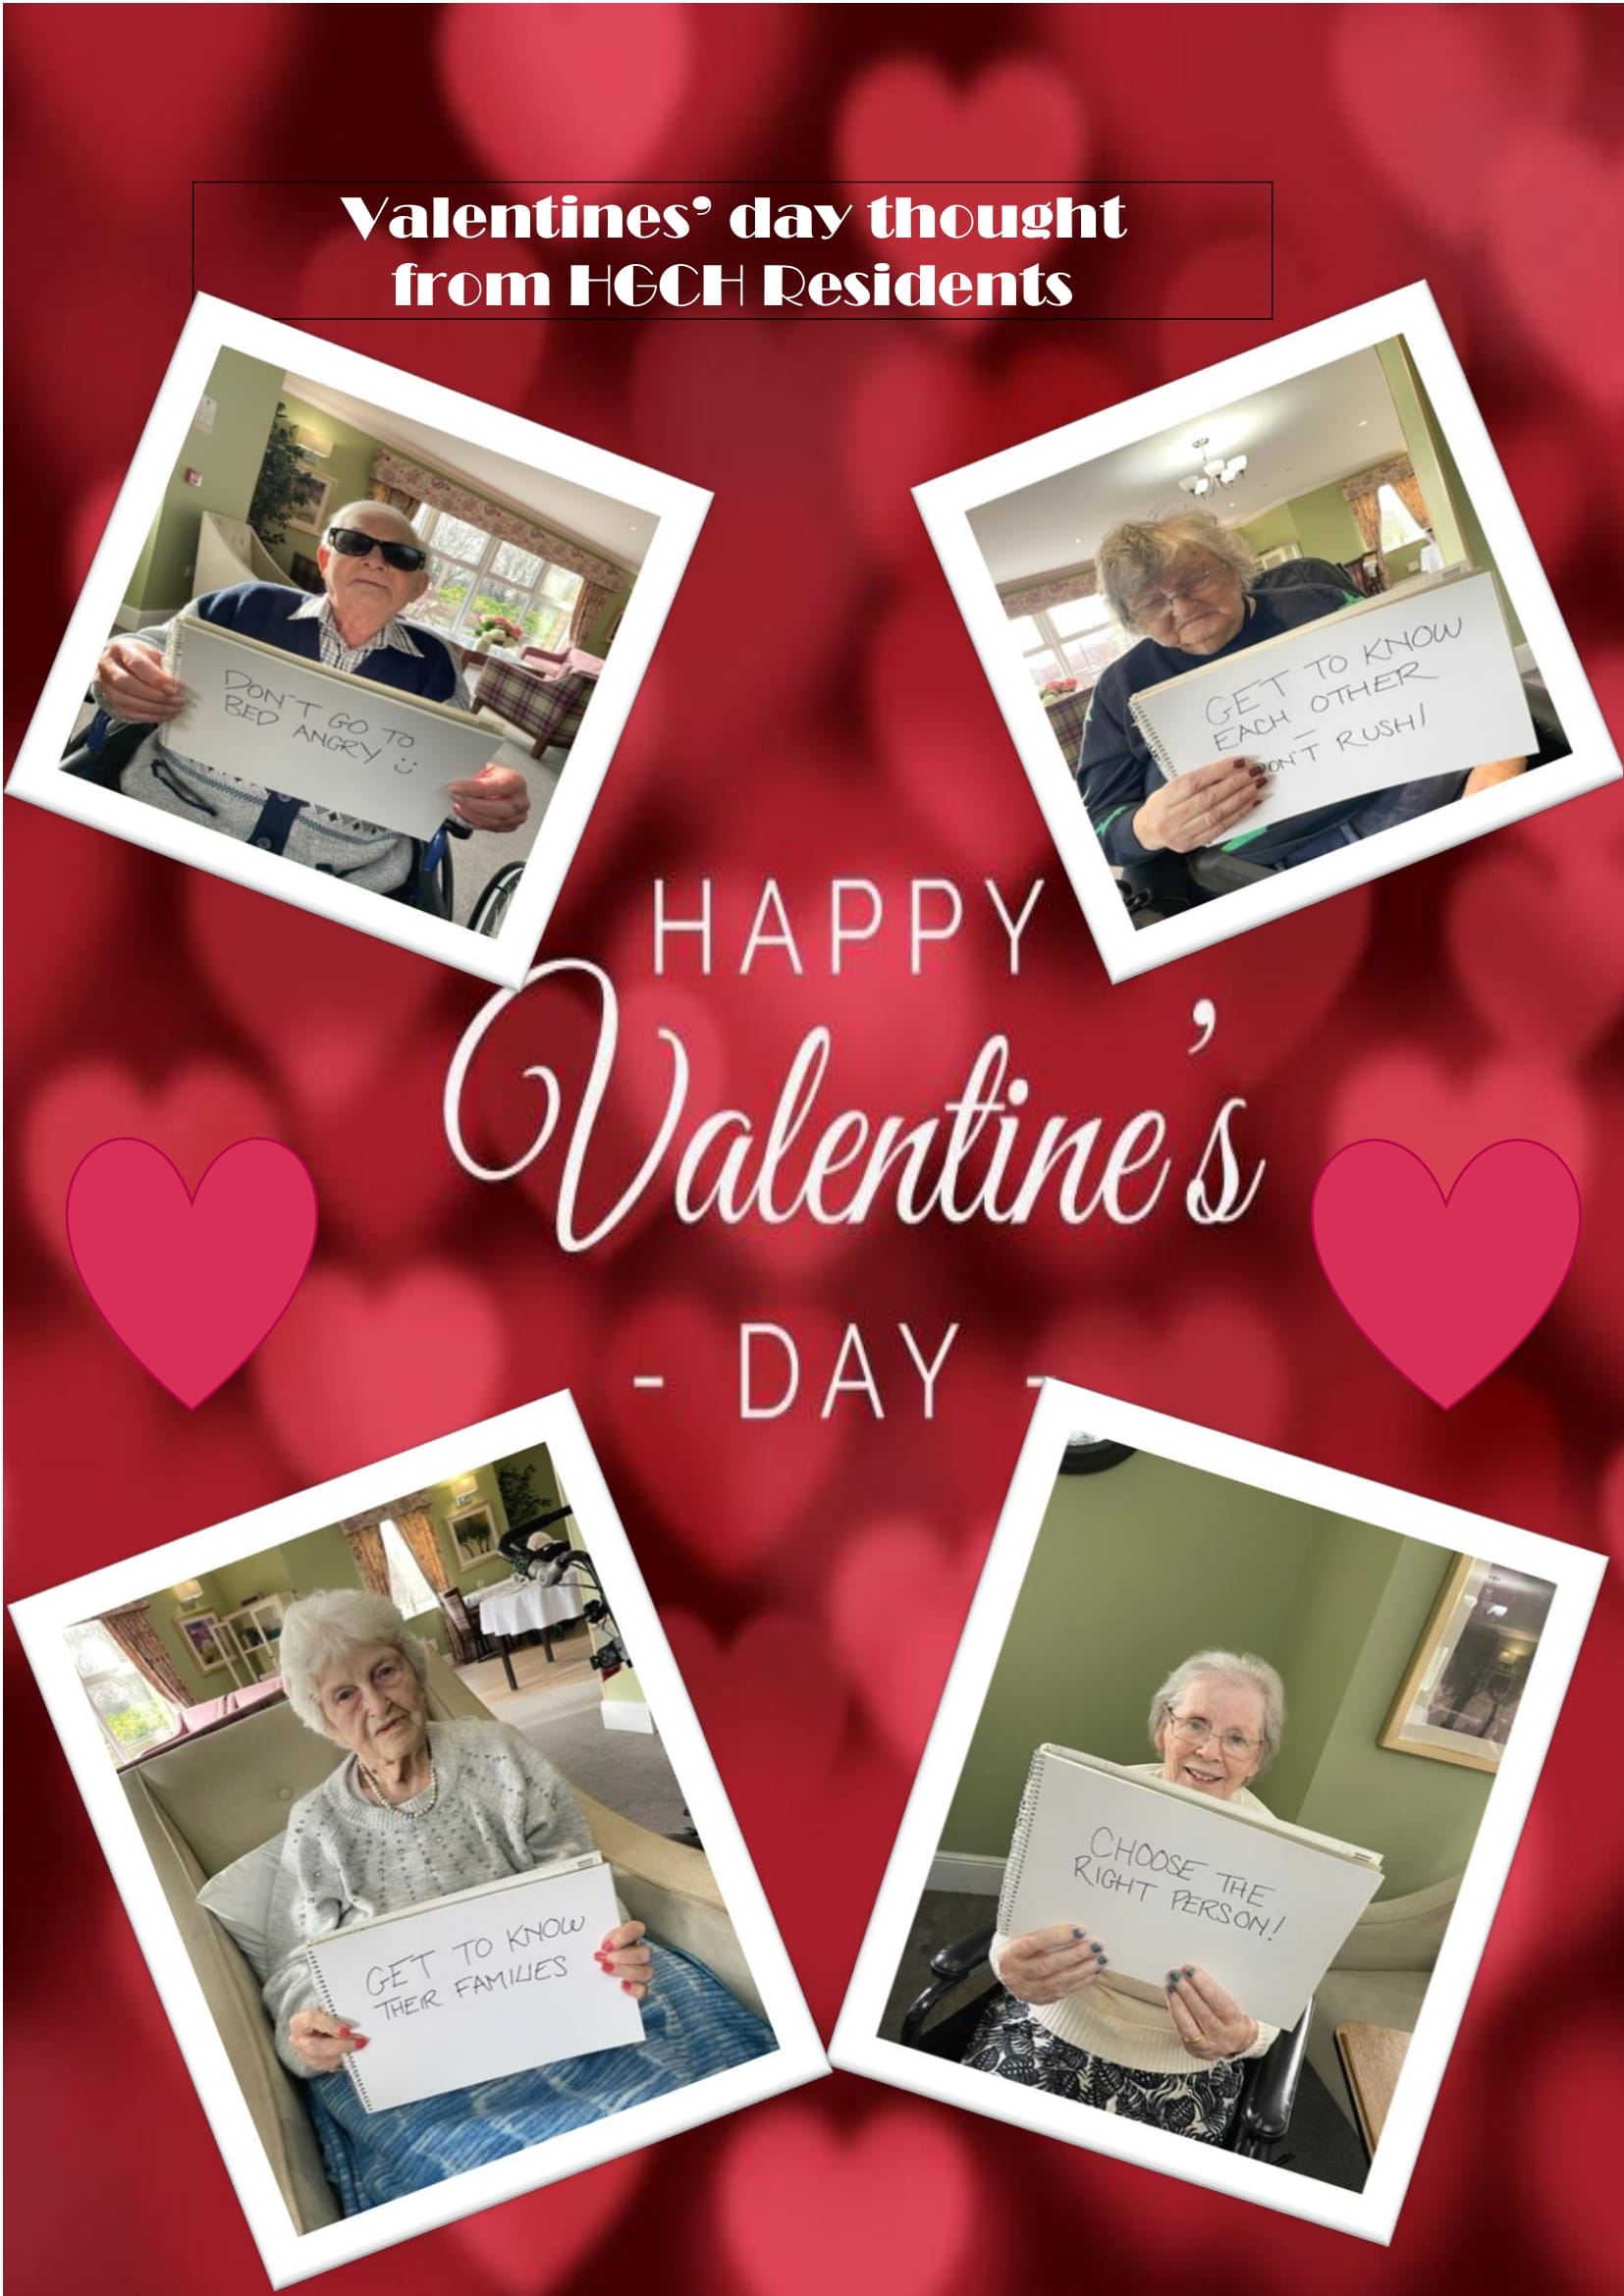 A collage of pictures of our residents holding signs on Valentines Day